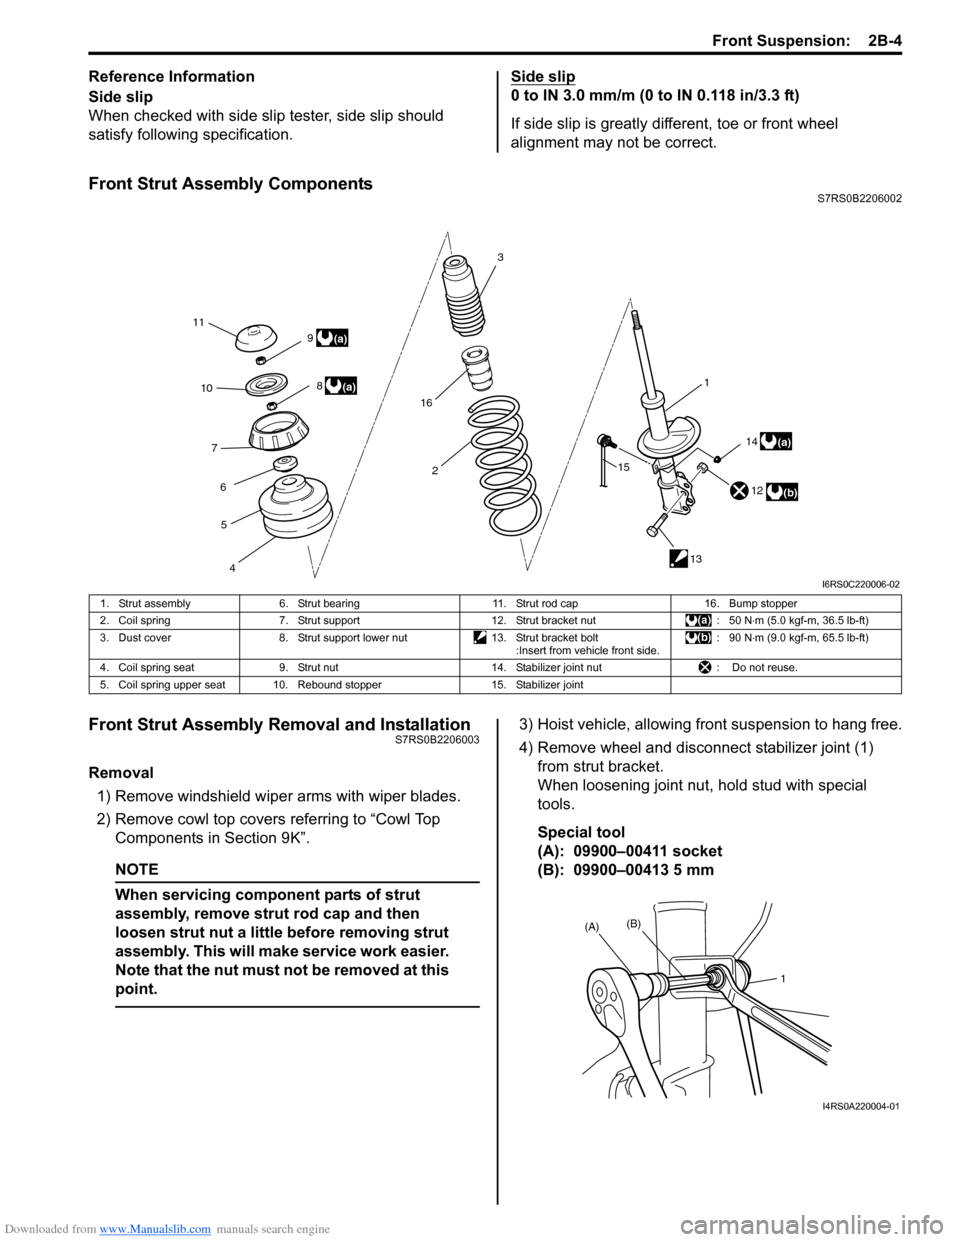 SUZUKI SWIFT 2007 2.G Service Workshop Manual Downloaded from www.Manualslib.com manuals search engine Front Suspension:  2B-4
Reference Information
Side slip
When checked with side slip tester, side slip should 
satisfy following specification.S